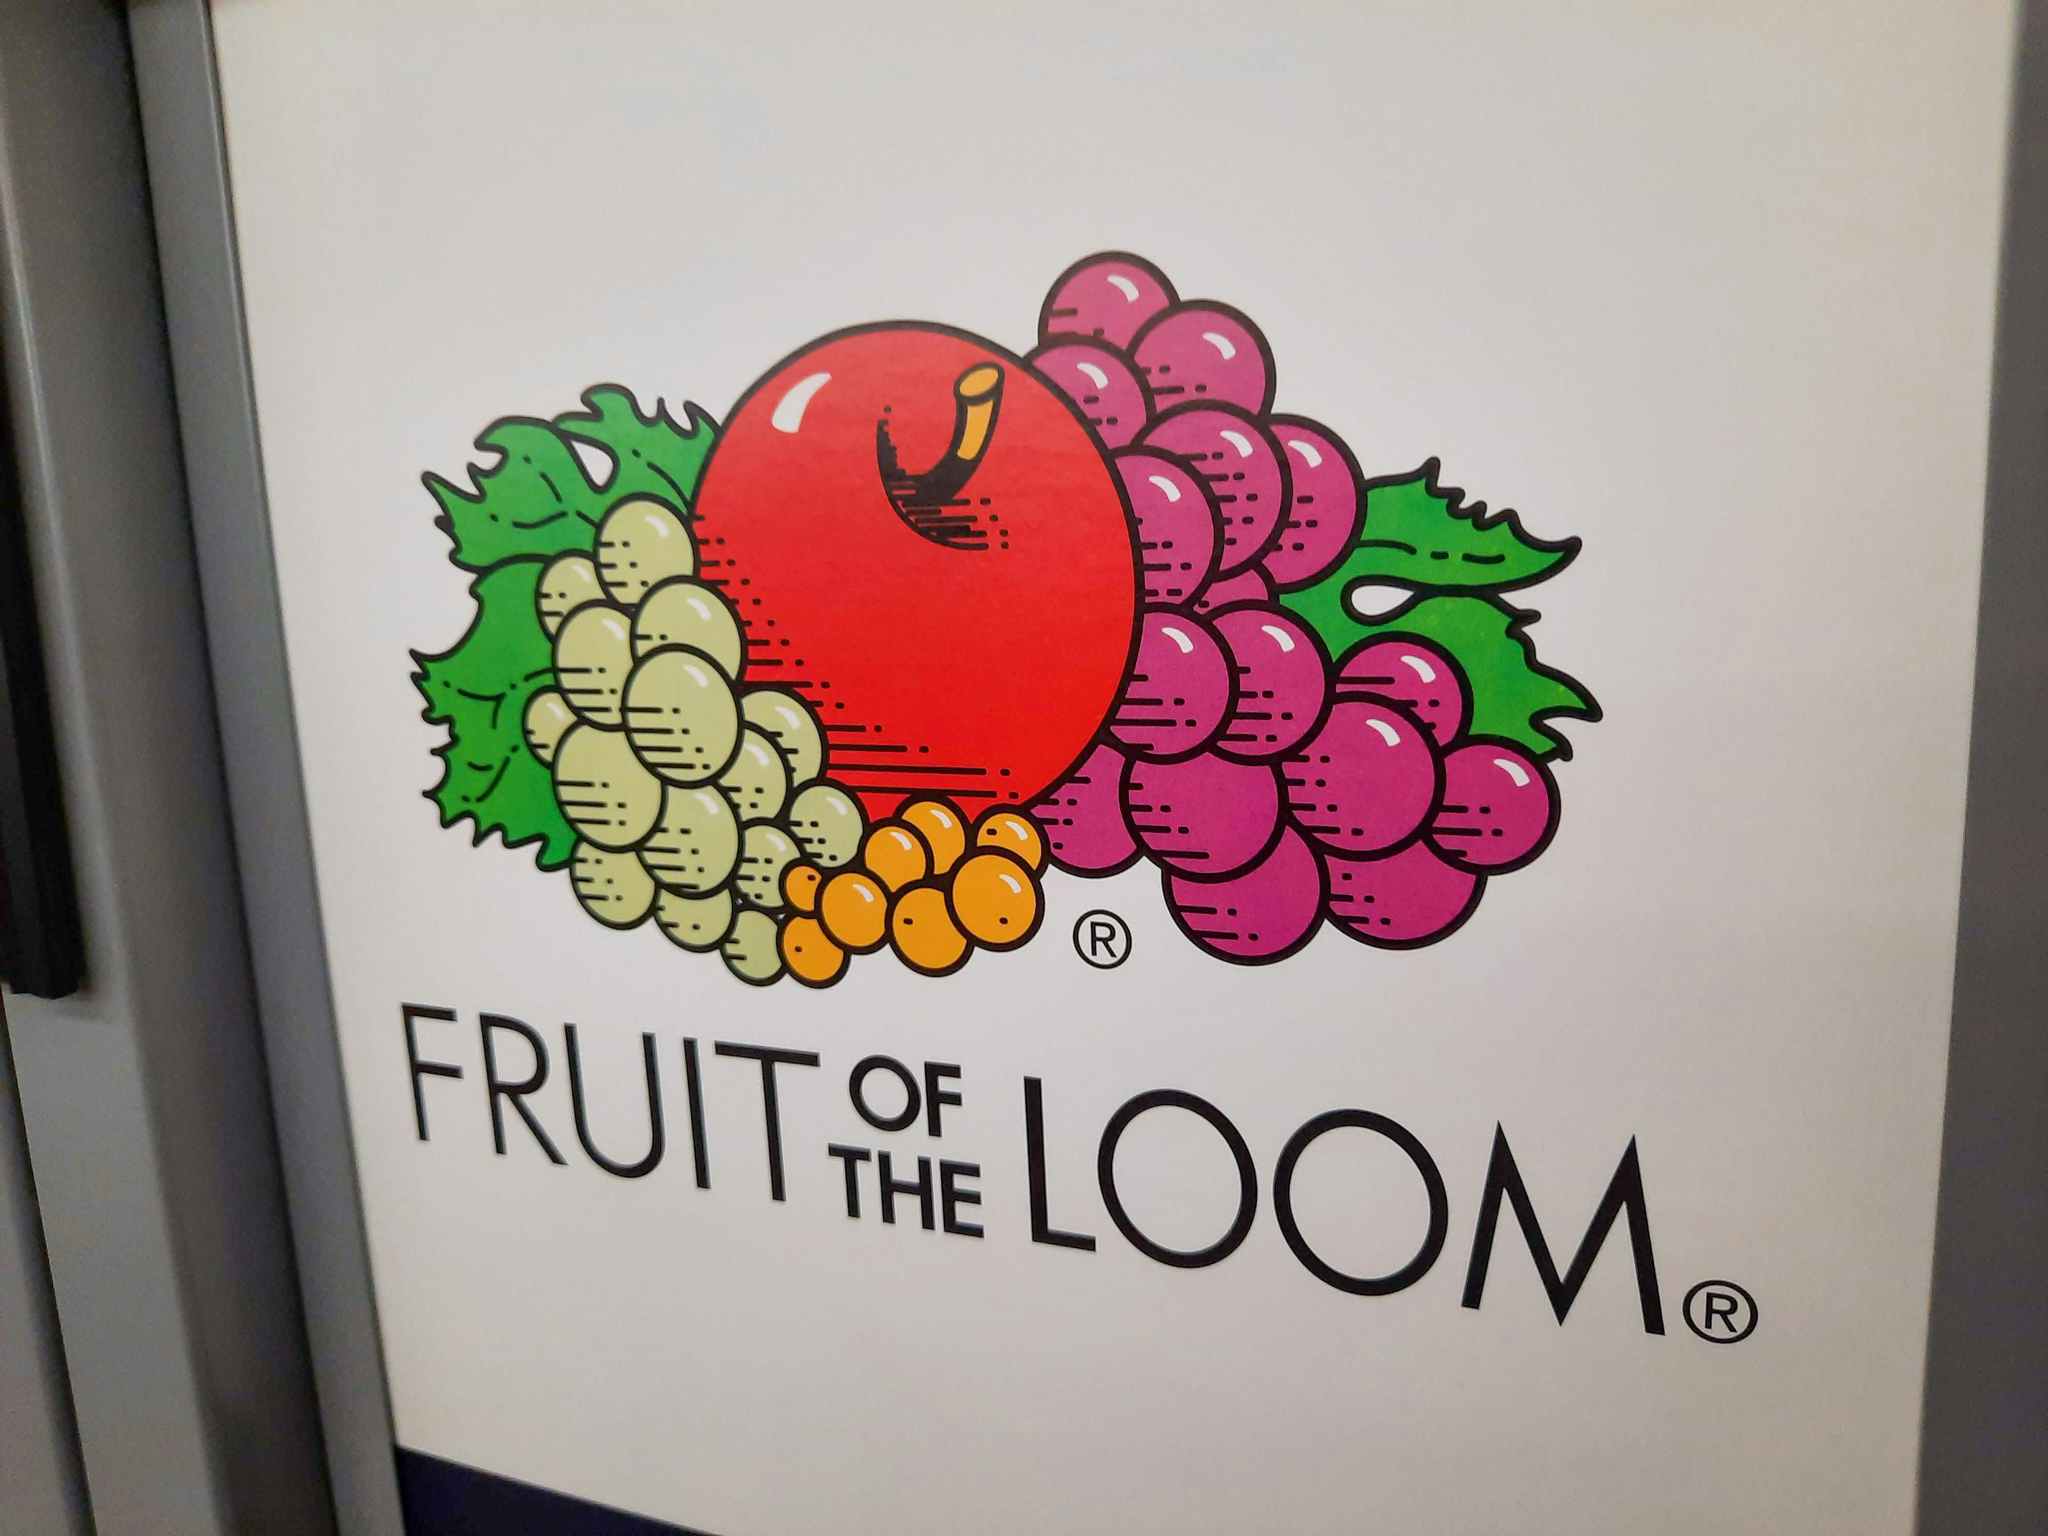 Fruit of the Loom Sale at Walmart: Shirts, Tanks, and Boxers Just $2 Each